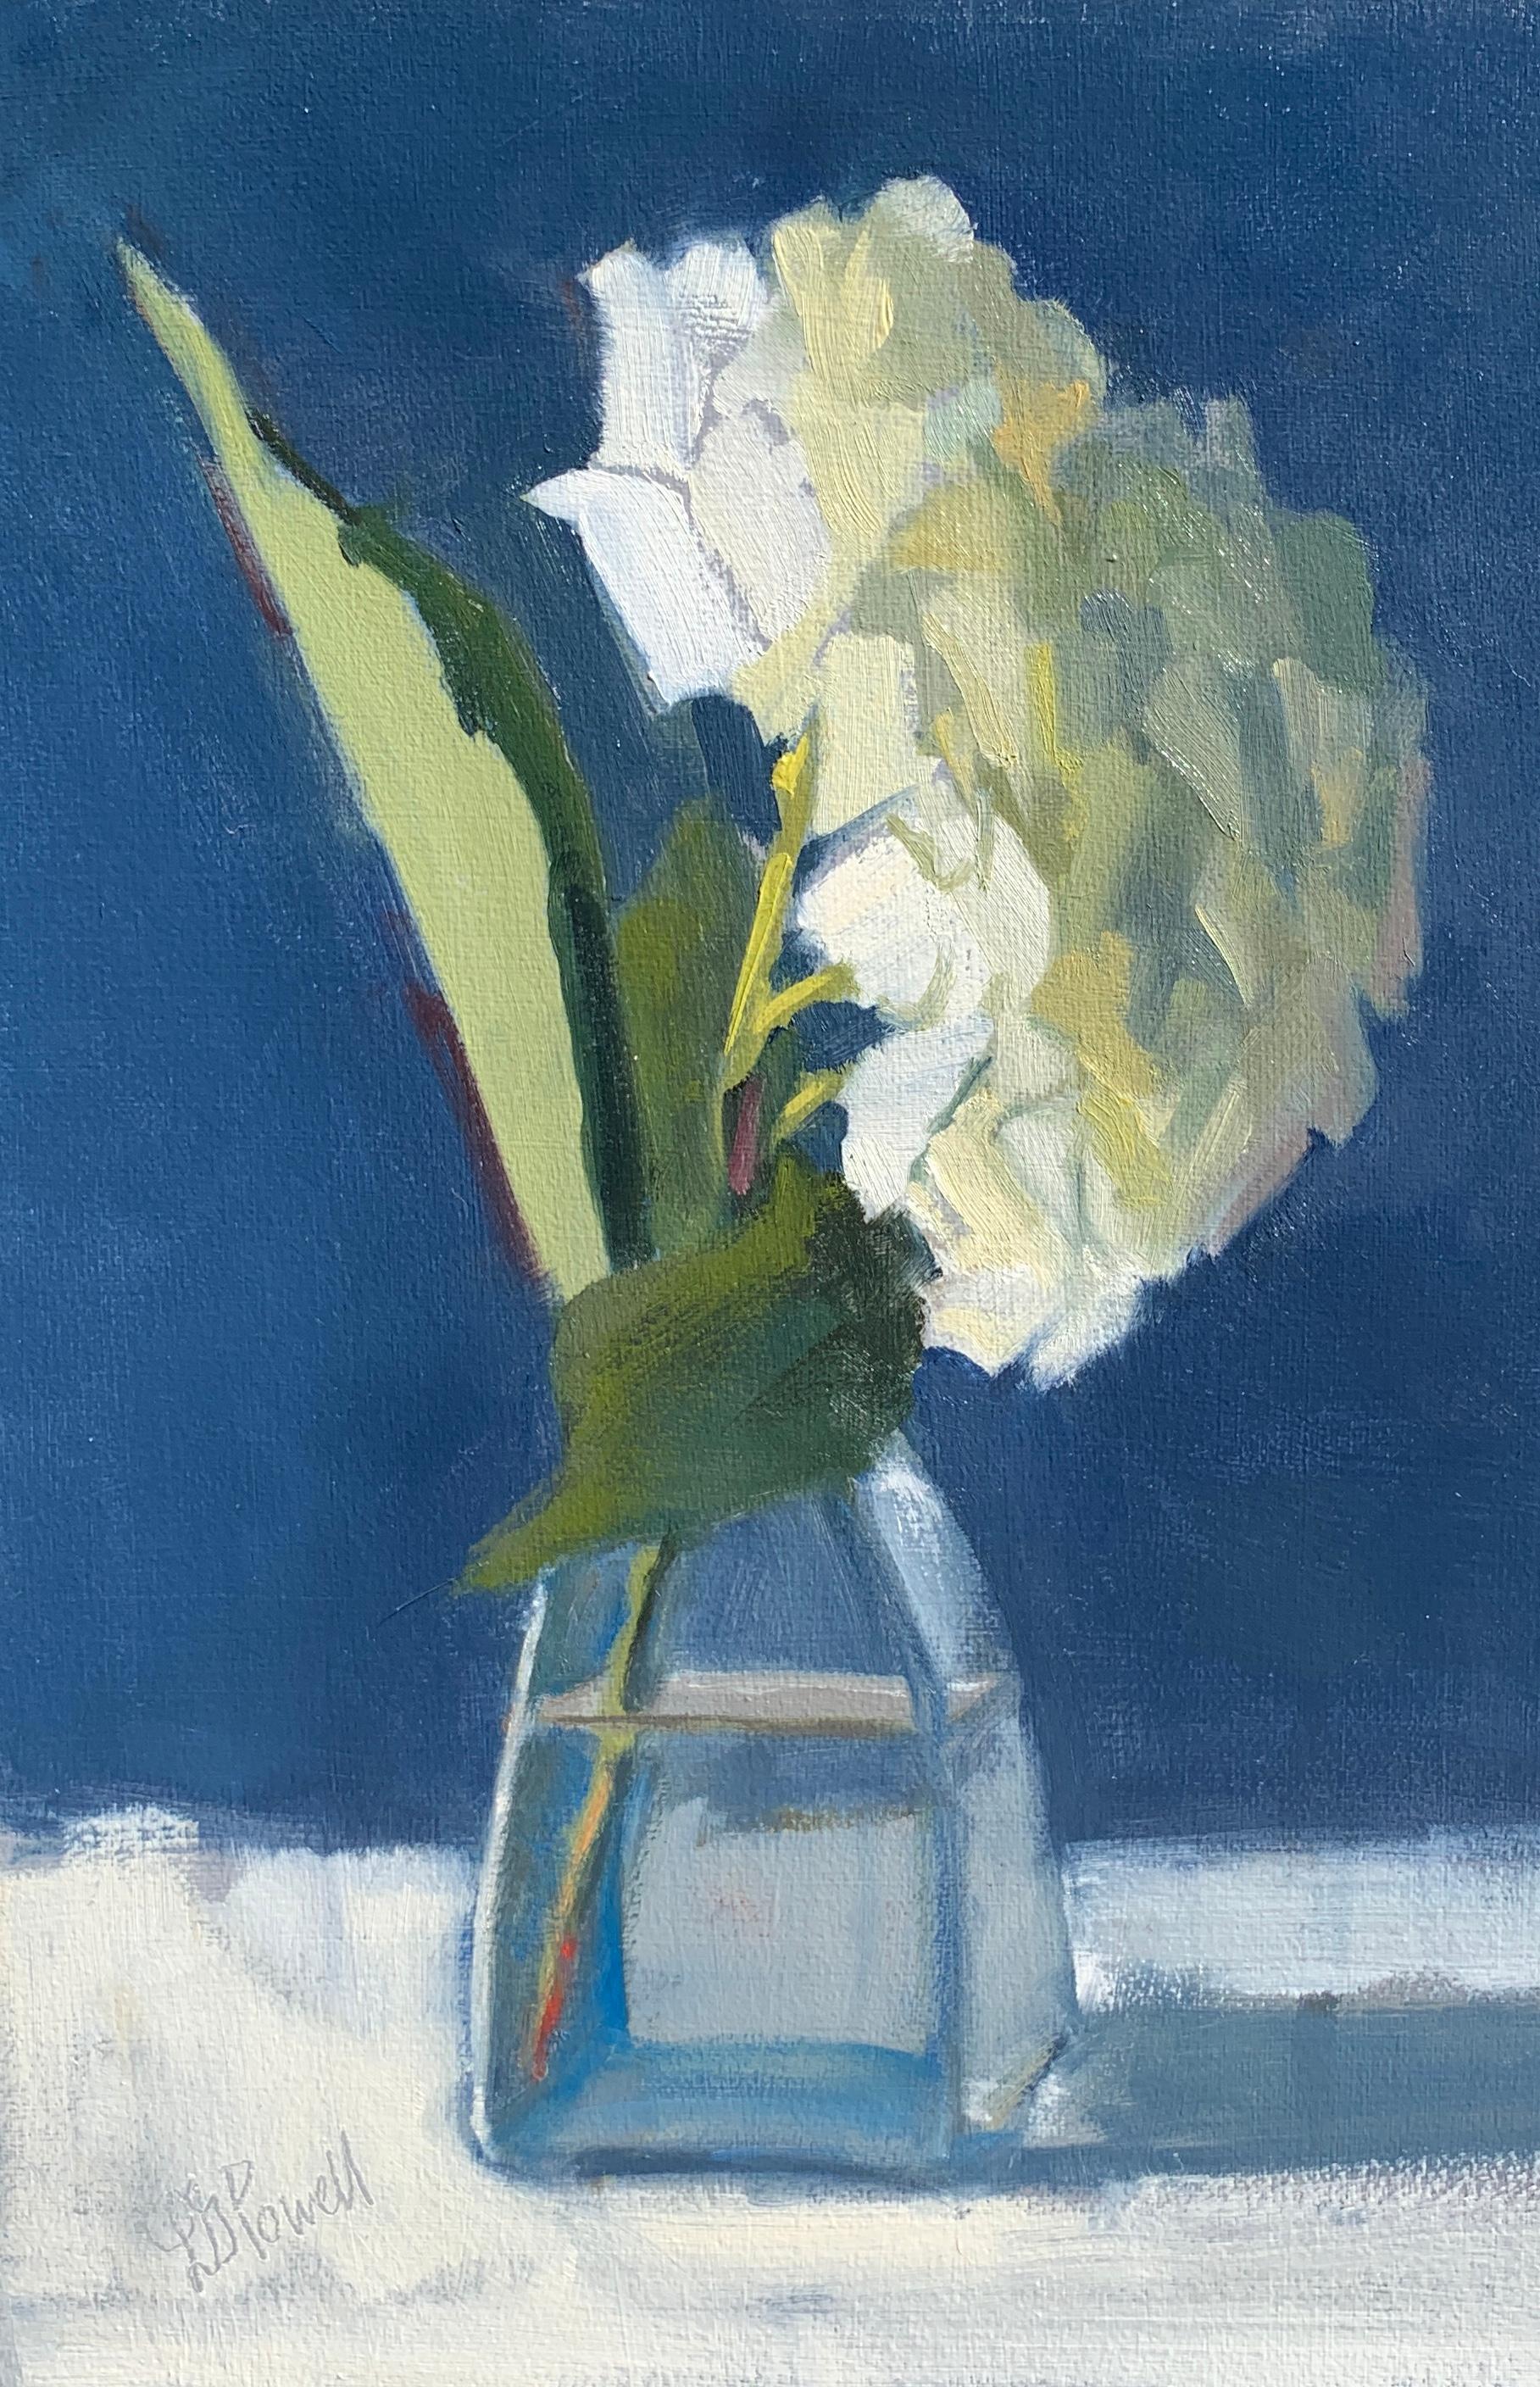 'Hydrangea on Tiptoe' is a small oil on board Post-Impressionist floral still-life painting created by American artist Lesley Powell in 2019. Featuring a palette made of blue, white, green and soft yellow tones, the painting depicts a delicate